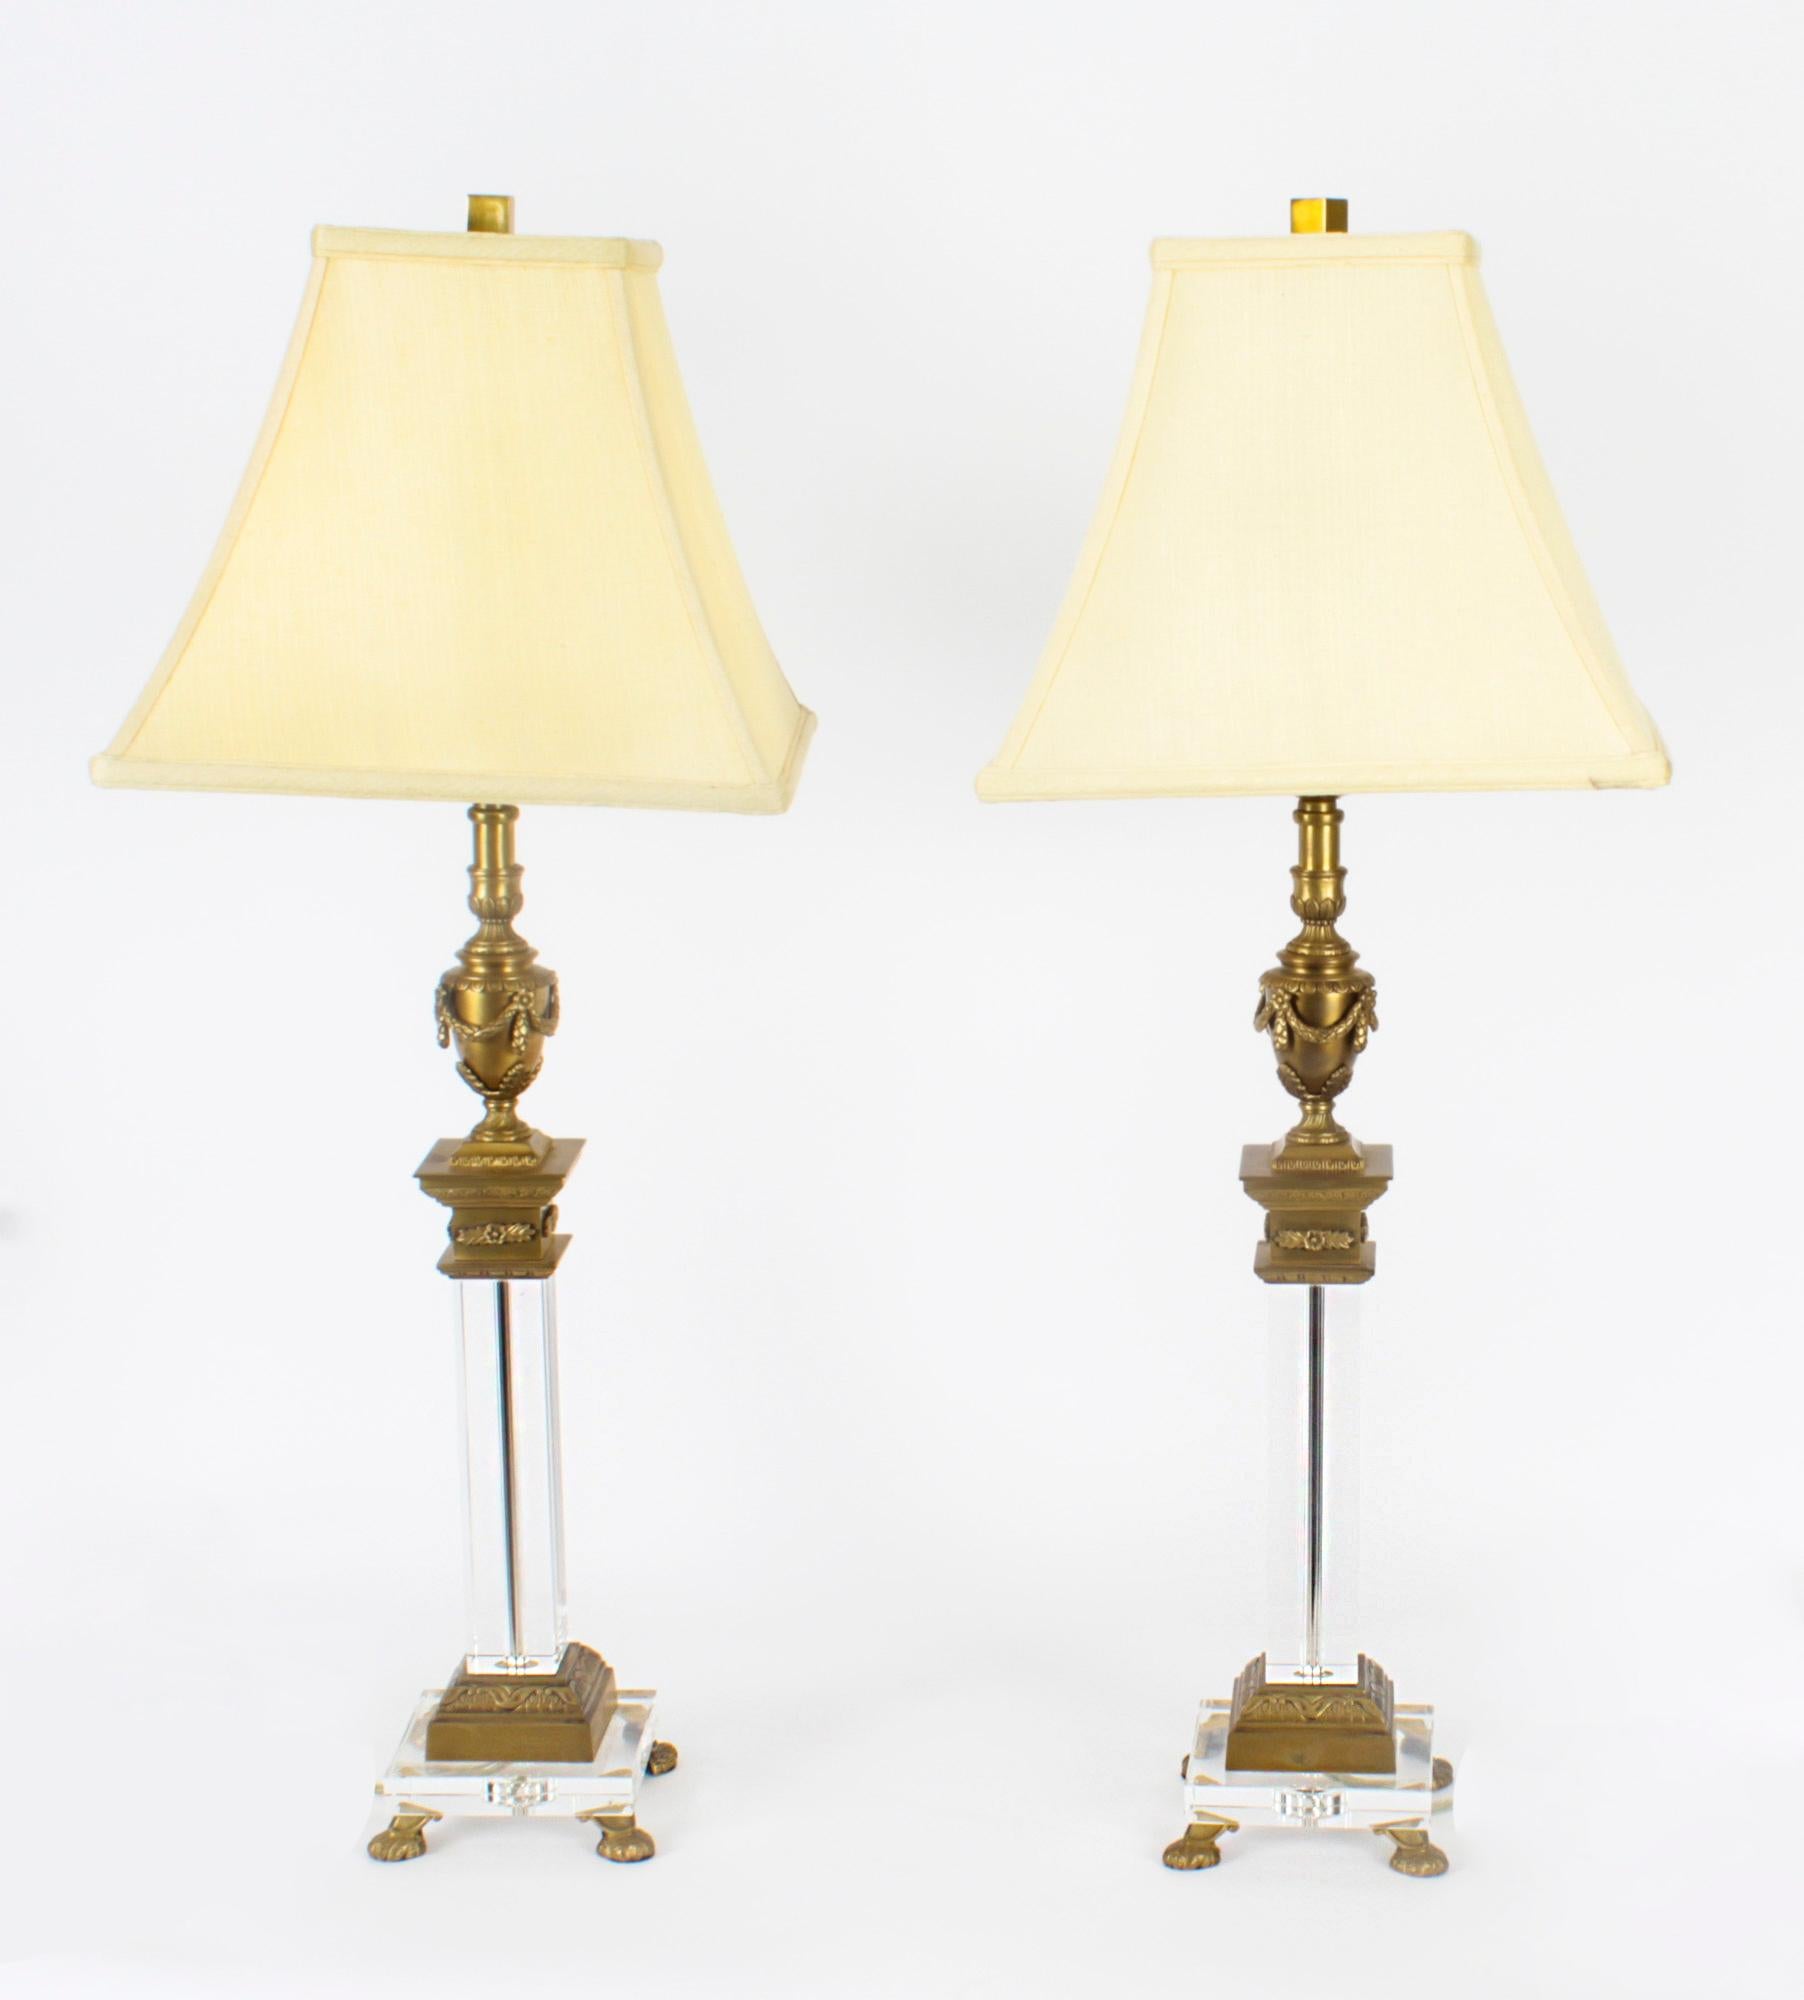 This is an impressive vintage pair of ormolu and glass classical corinthian column & urn table lamp, circa Mid 20th Century in date.

Each lamp features a classical urn capital with swags, above a square shaped Corinthian column decorated with